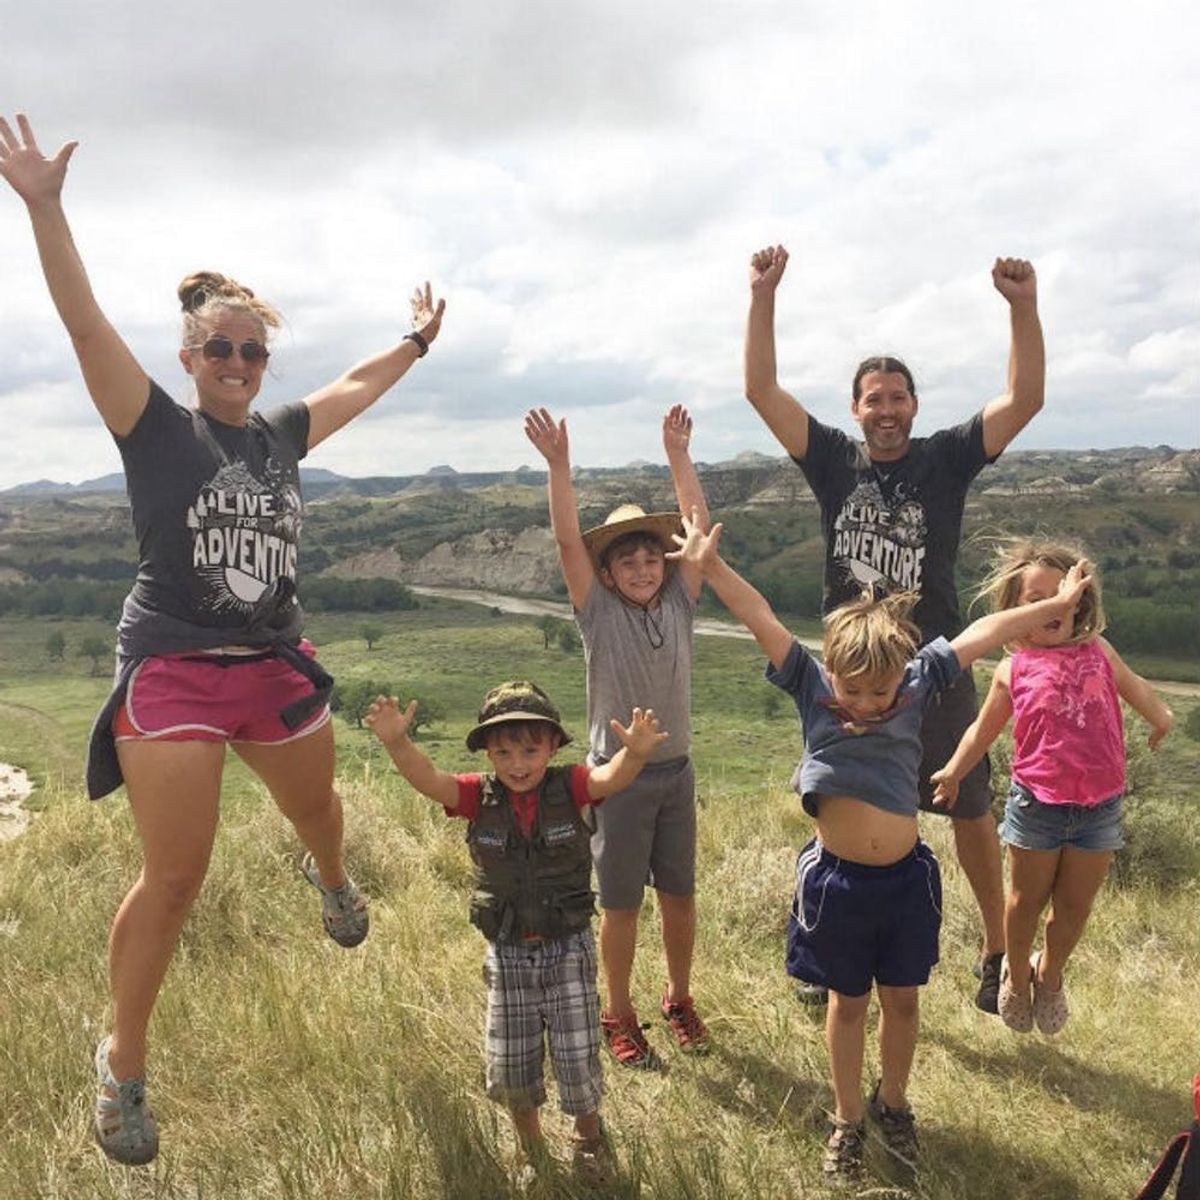 Meet 6 Fascinating Families That Travel the Globe Full-Time